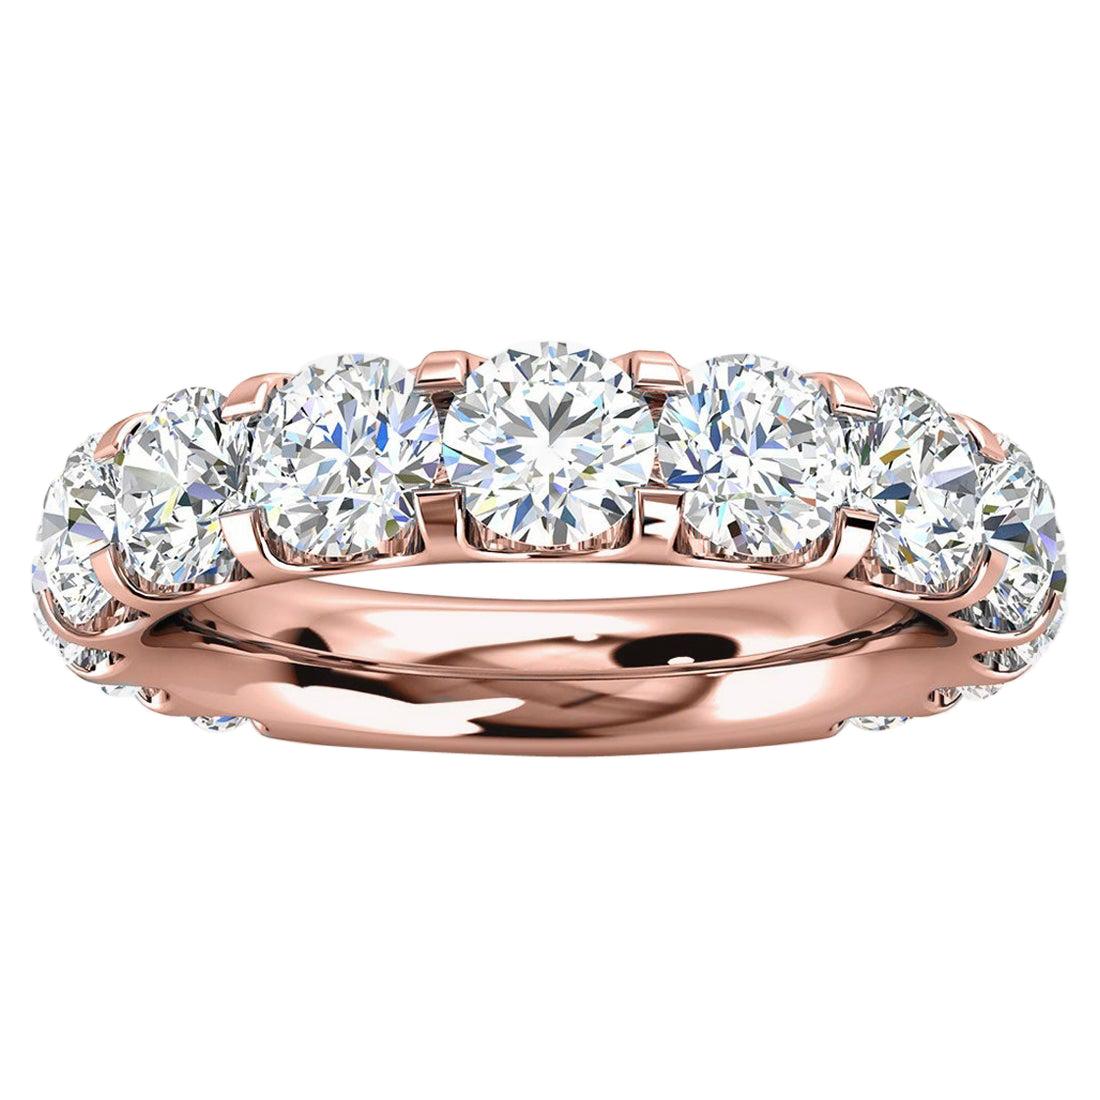 For Sale:  18k Rose Gold Carole Micro-Prong Diamond Ring '3 Ct. Tw'